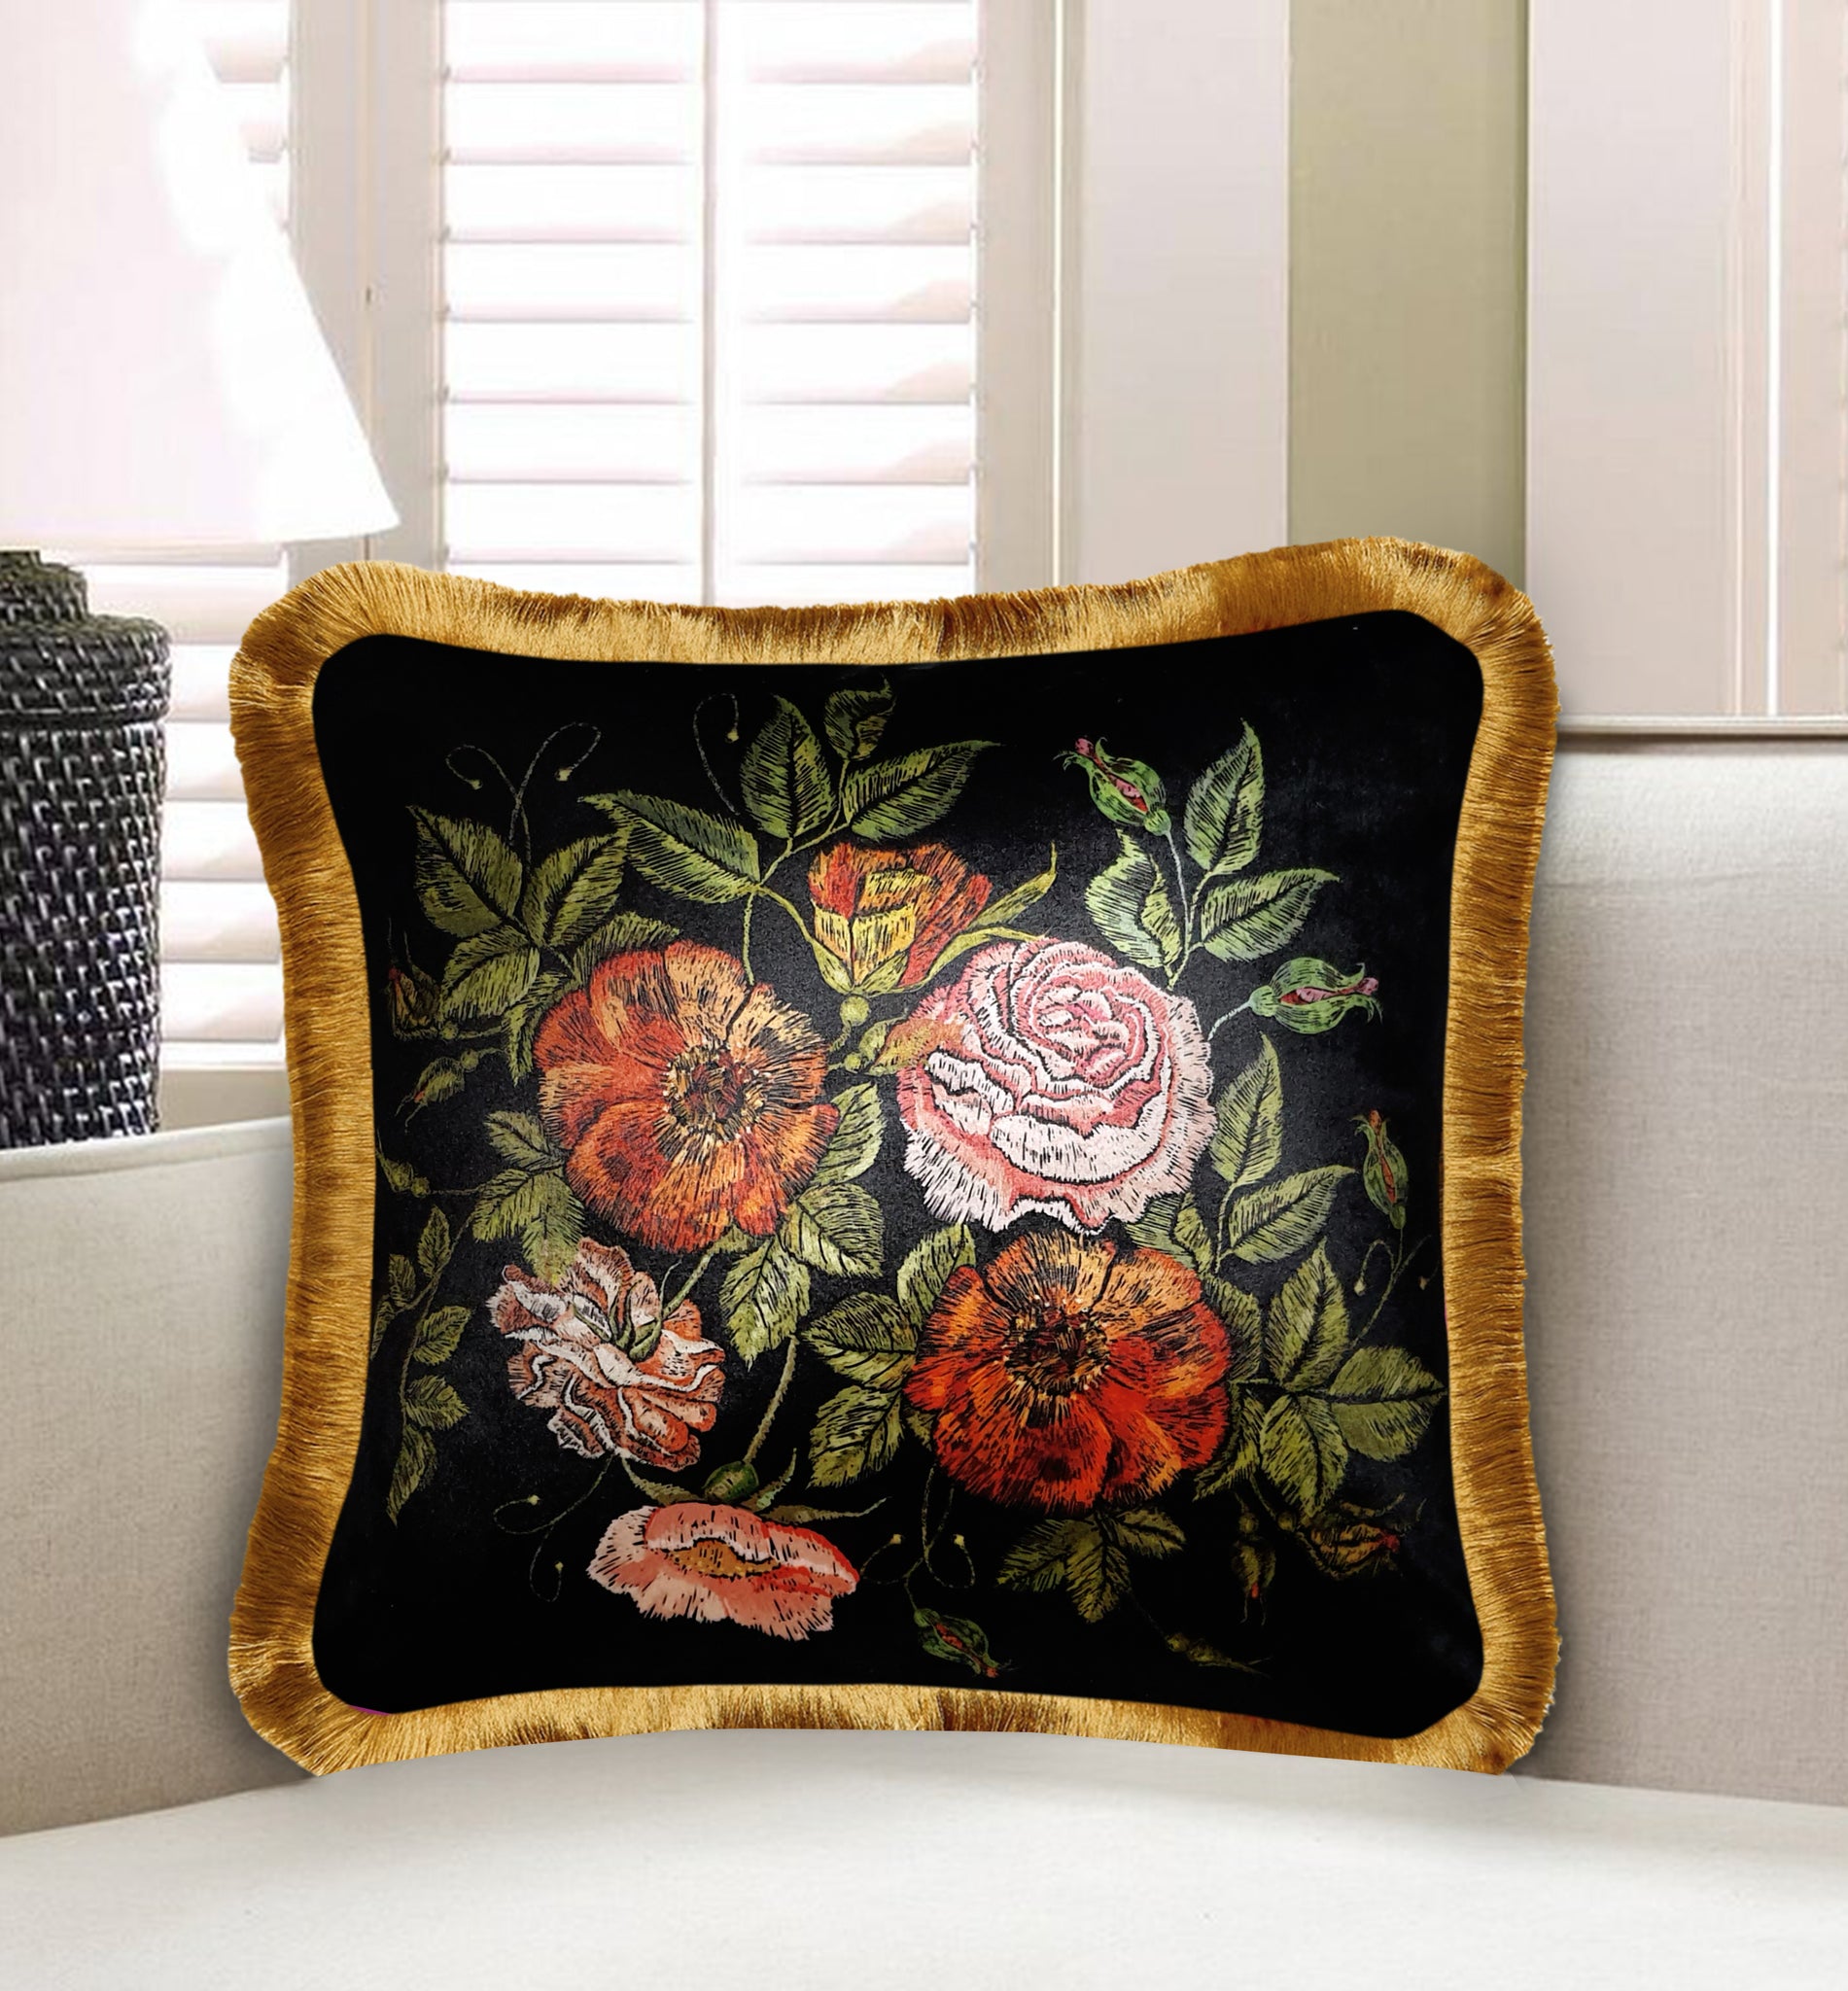  Velvet Cushion Cover Embroidery Imitated Rose Bouquet Decorative Pillowcase Classic Home Decor Throw Pillow for Sofa Chair Couch 45x45 cm 